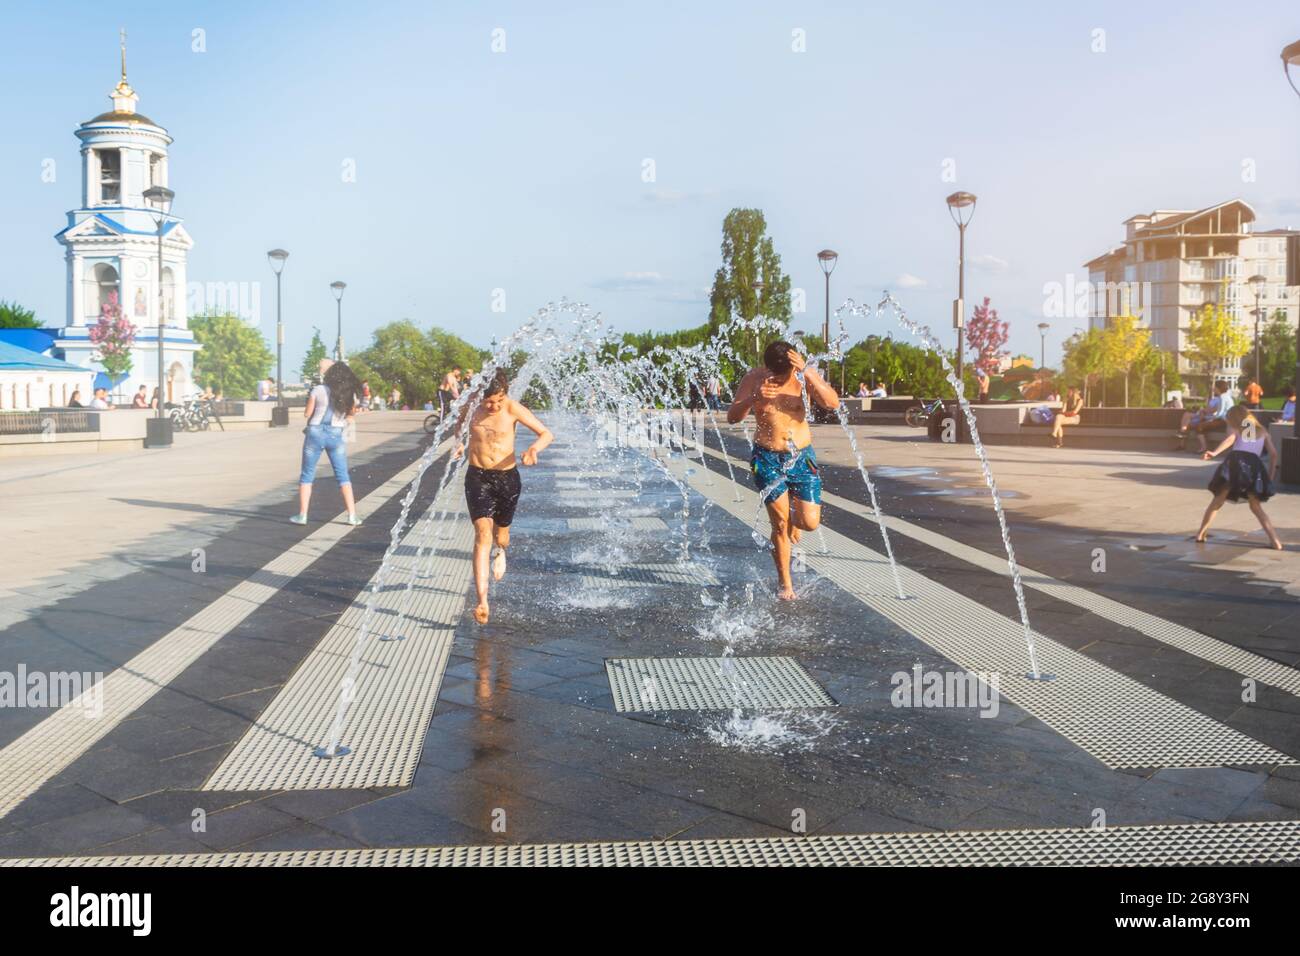 Fountain on Sovetskaya square in Voronezh on may 08, 2019. Children bathe in the cold water of the fountain in the spring. Children's entertainment in Stock Photo